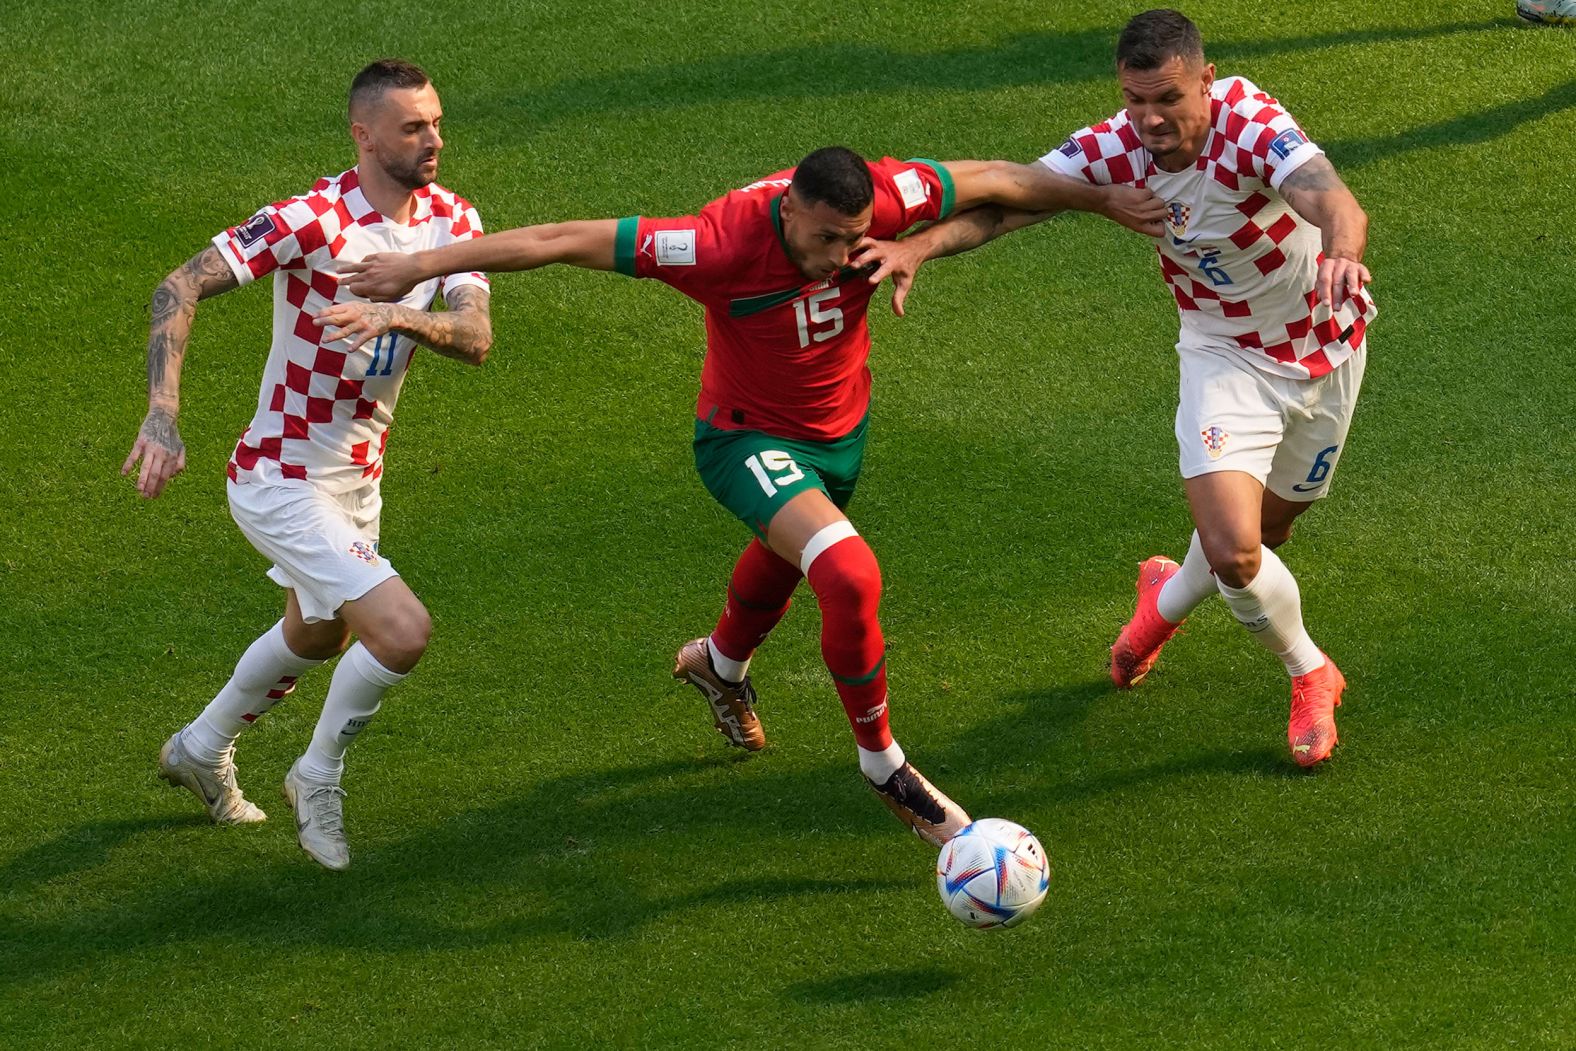 Morocco's Selim Amallah tries to dribble past Croatia's Marcelo Brozovic, left, and Dejan Lovren during their 0-0 draw on November 23. Croatia was the runner-up in the last World Cup.